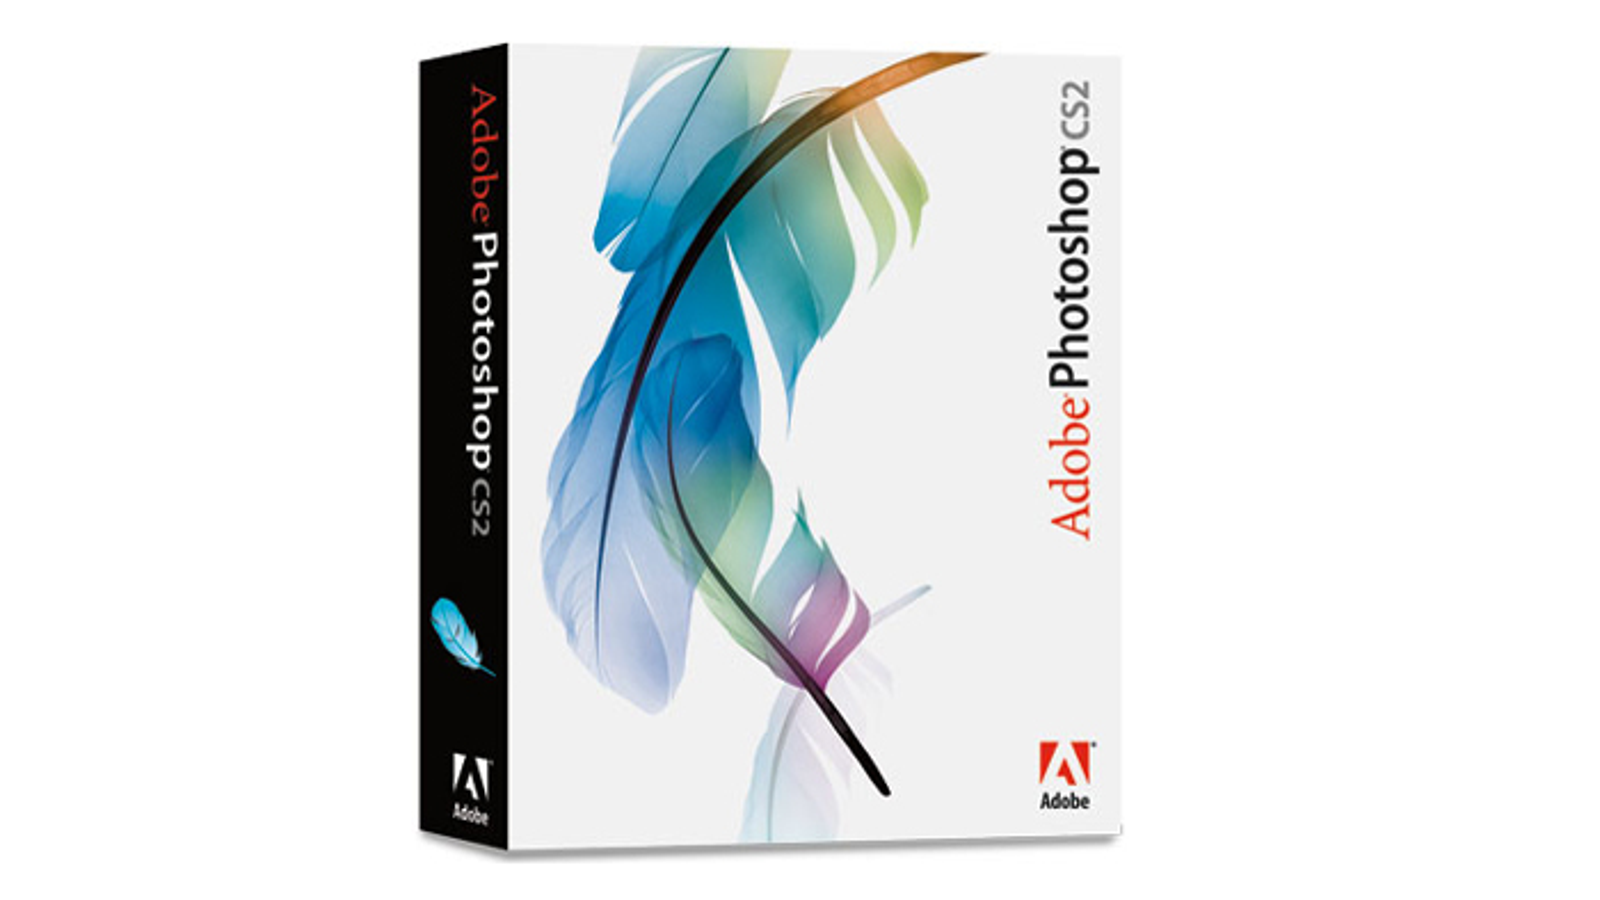 indesign cs2 free download full version with crack